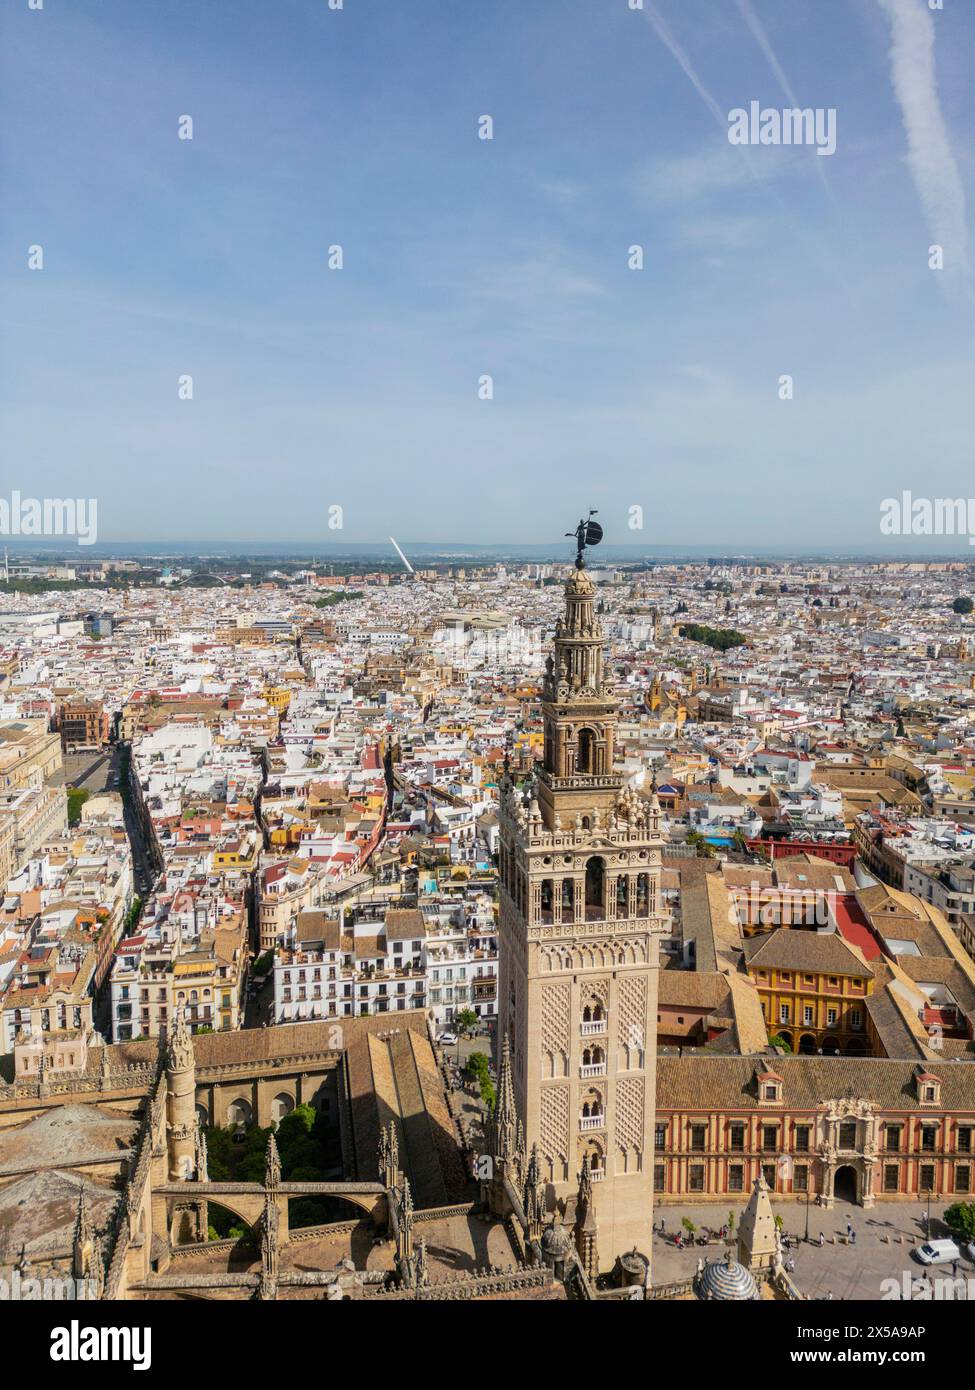 Aerial view of Seville highlighting the iconic cathedral and La Giralda tower with the sculpture that has become a symbol of the city, alongside the M Stock Photo